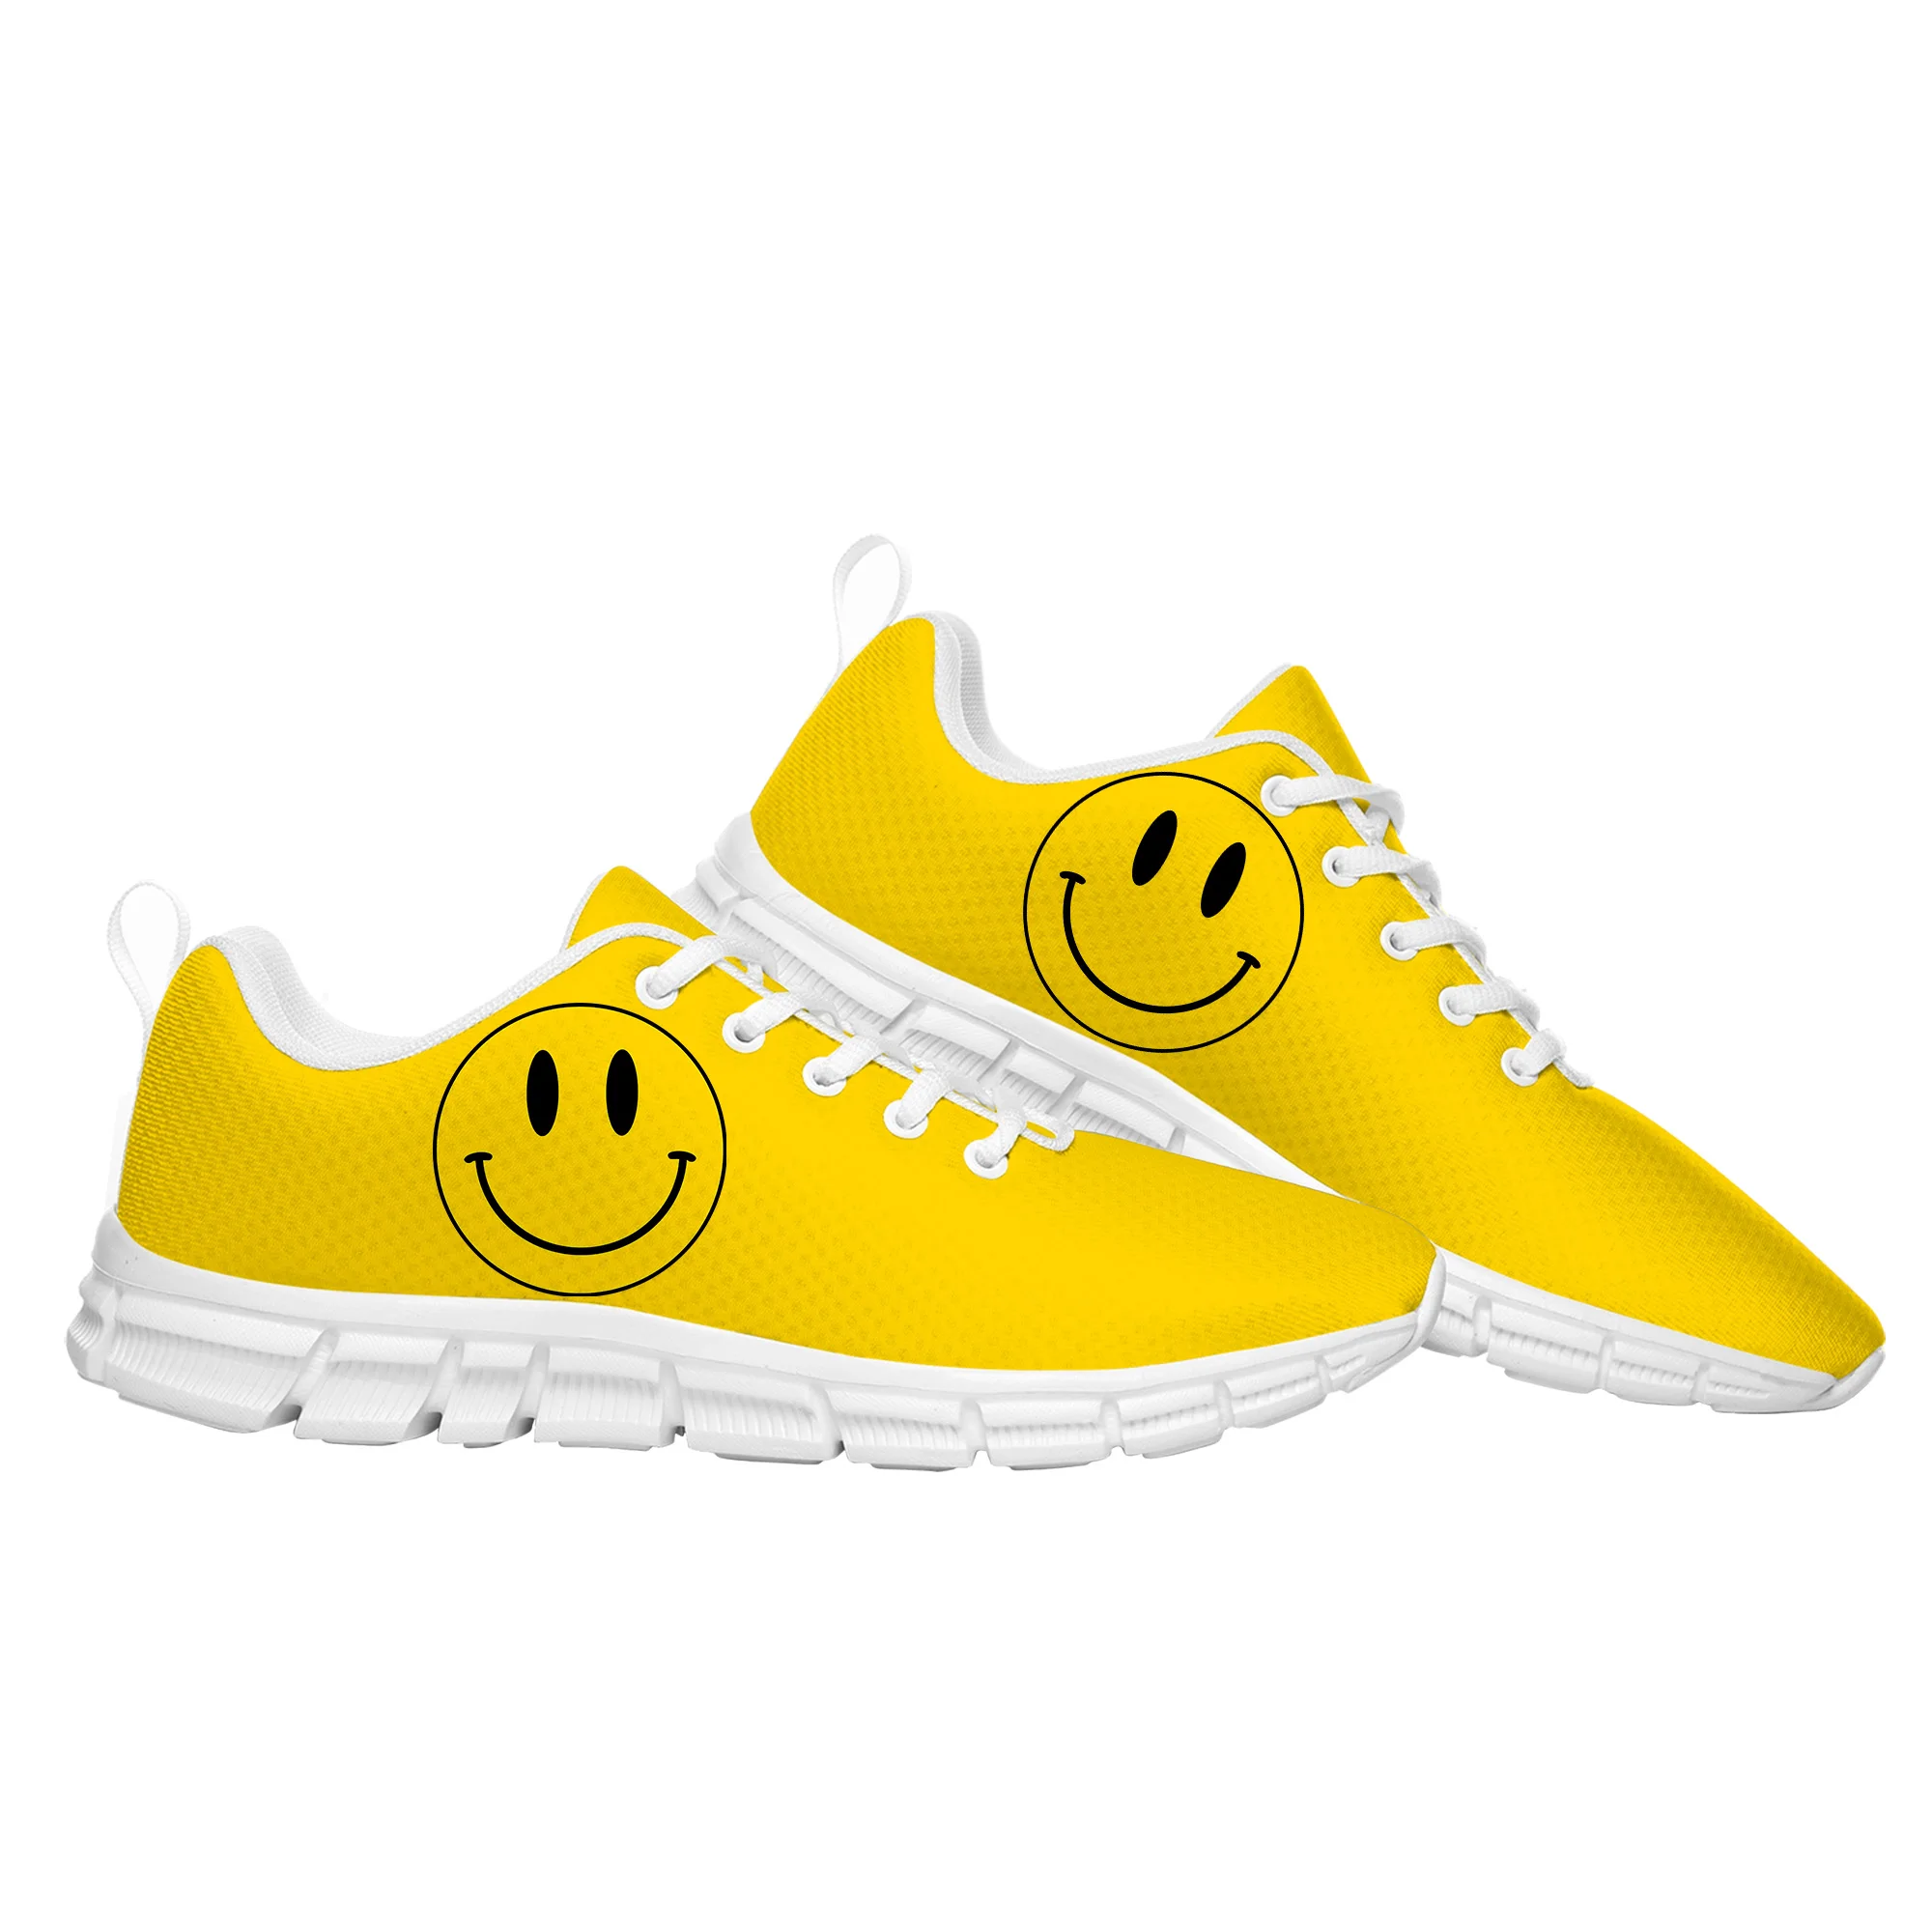 

melt Smiley Smile Sports Shoes Mens Womens Teenager Kids Children High Quality Sneakers Parent Child Sneaker Customize Shoe